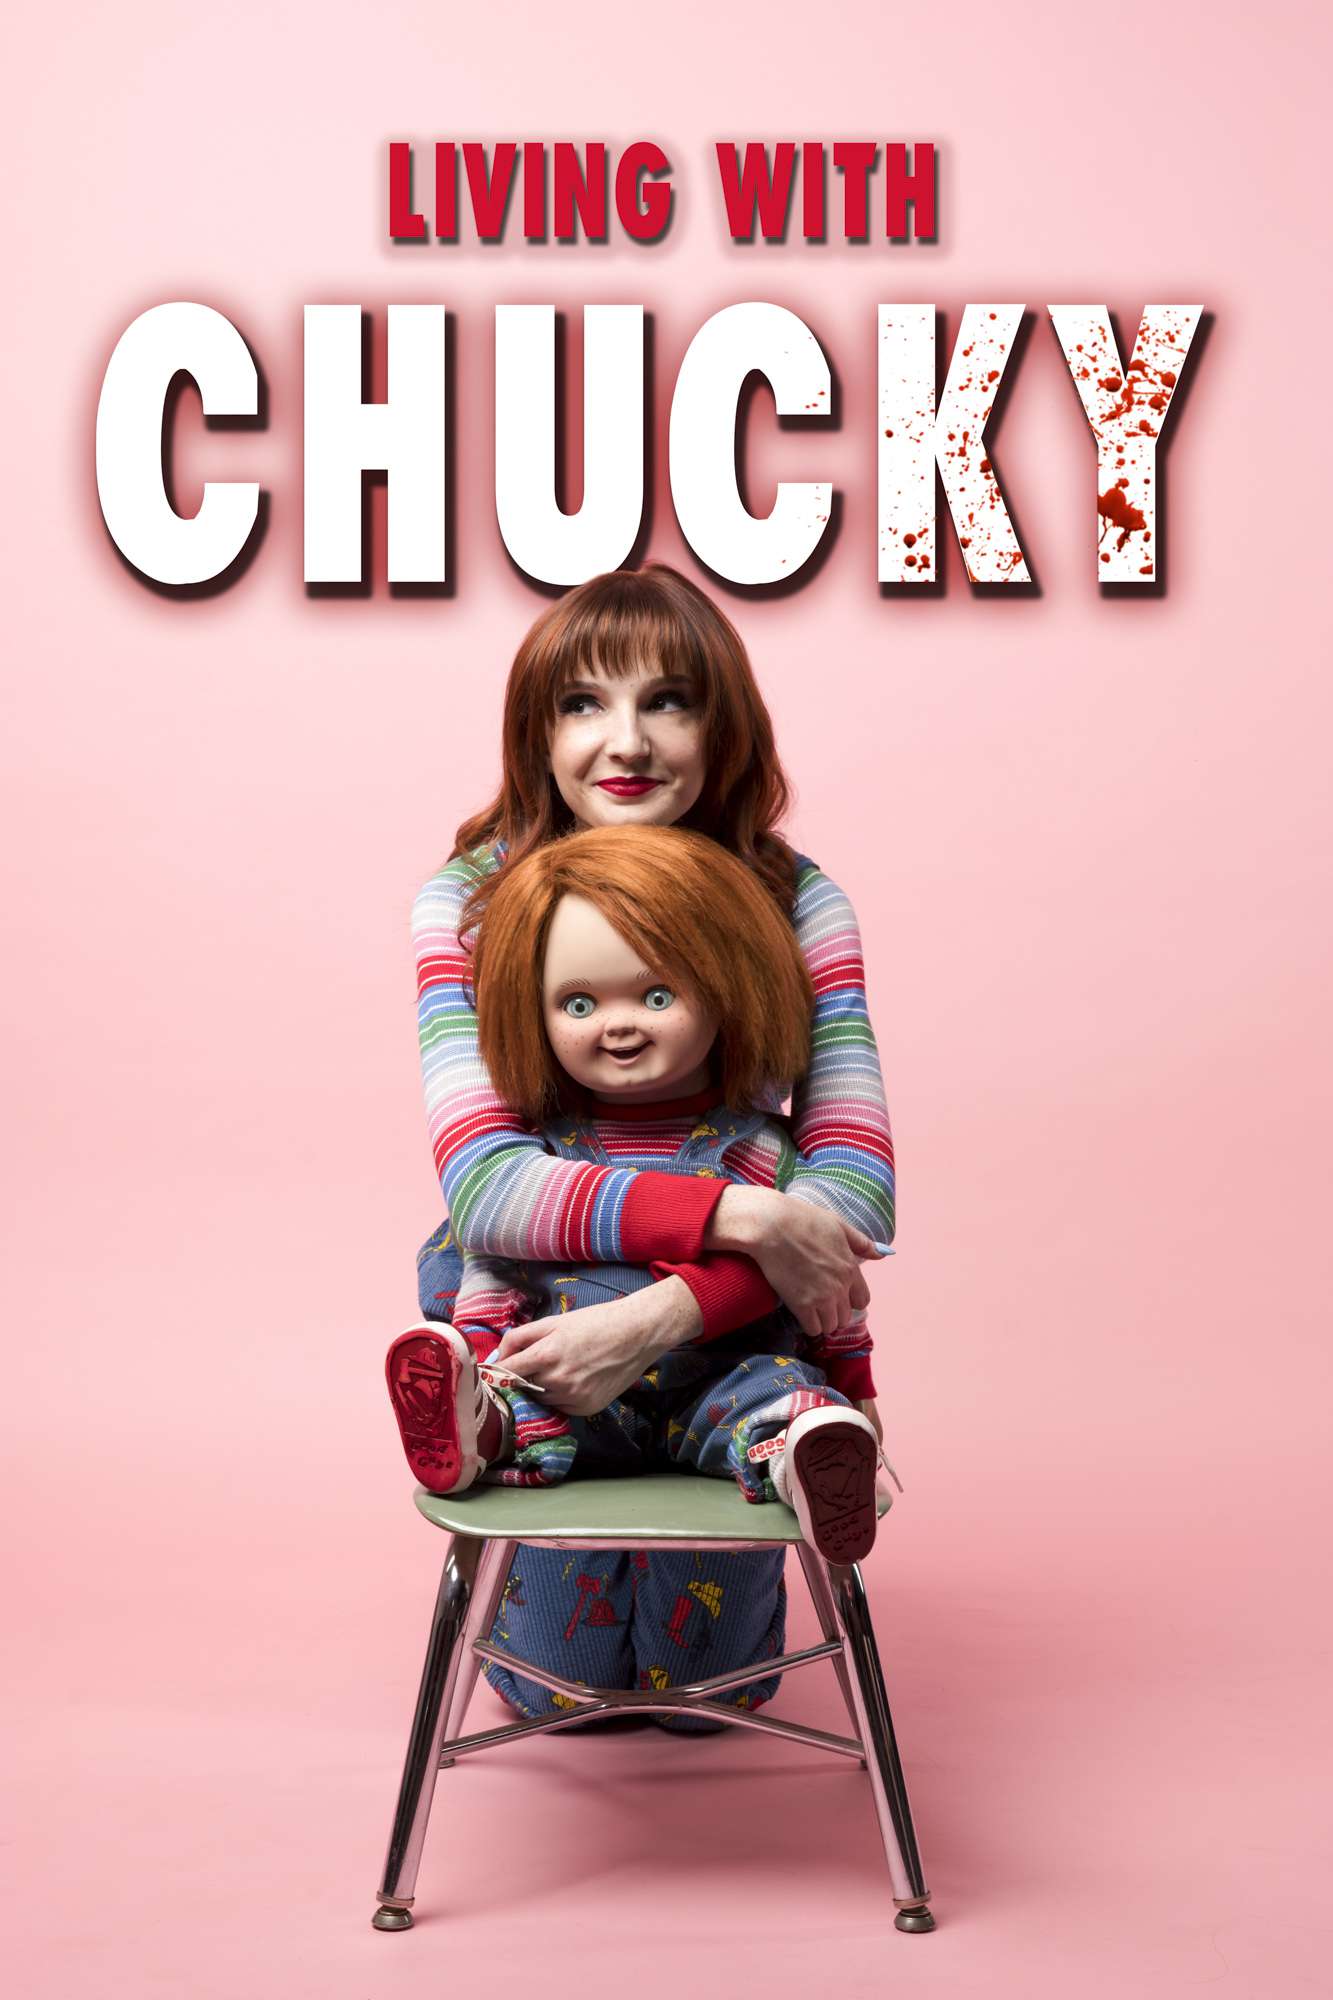 Director Kyra Gardner in a promo image for 'Living With Chucky'